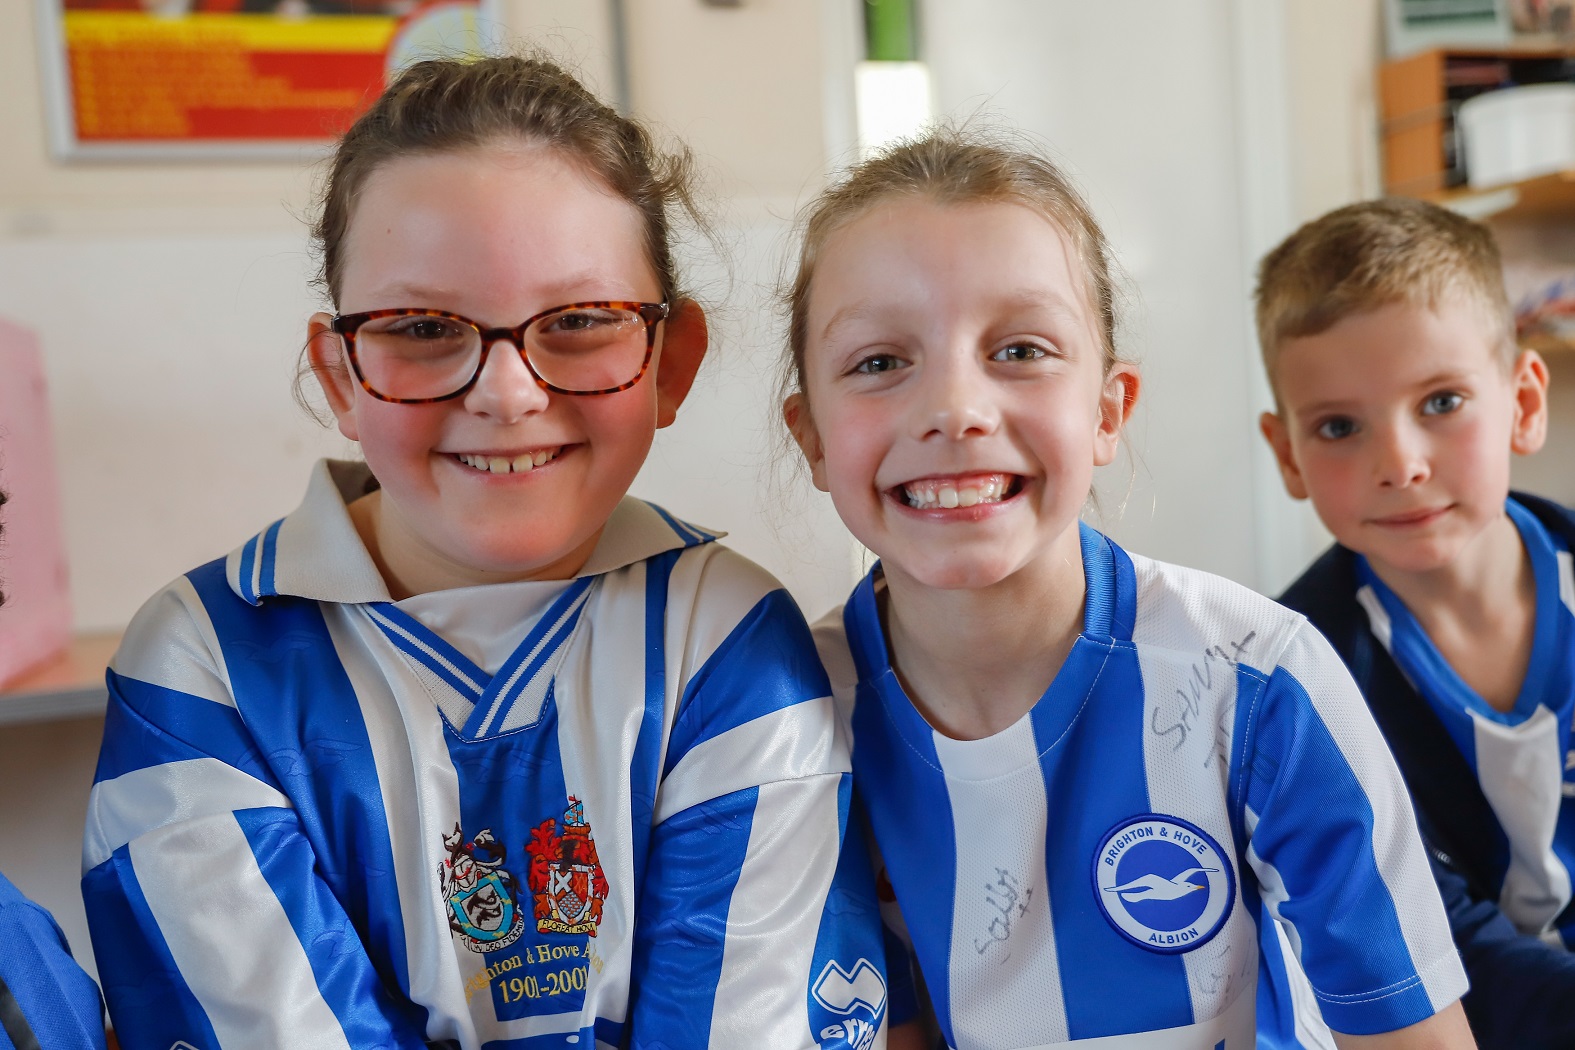 Blue and White Day raises £10,000 for Albion in the Community